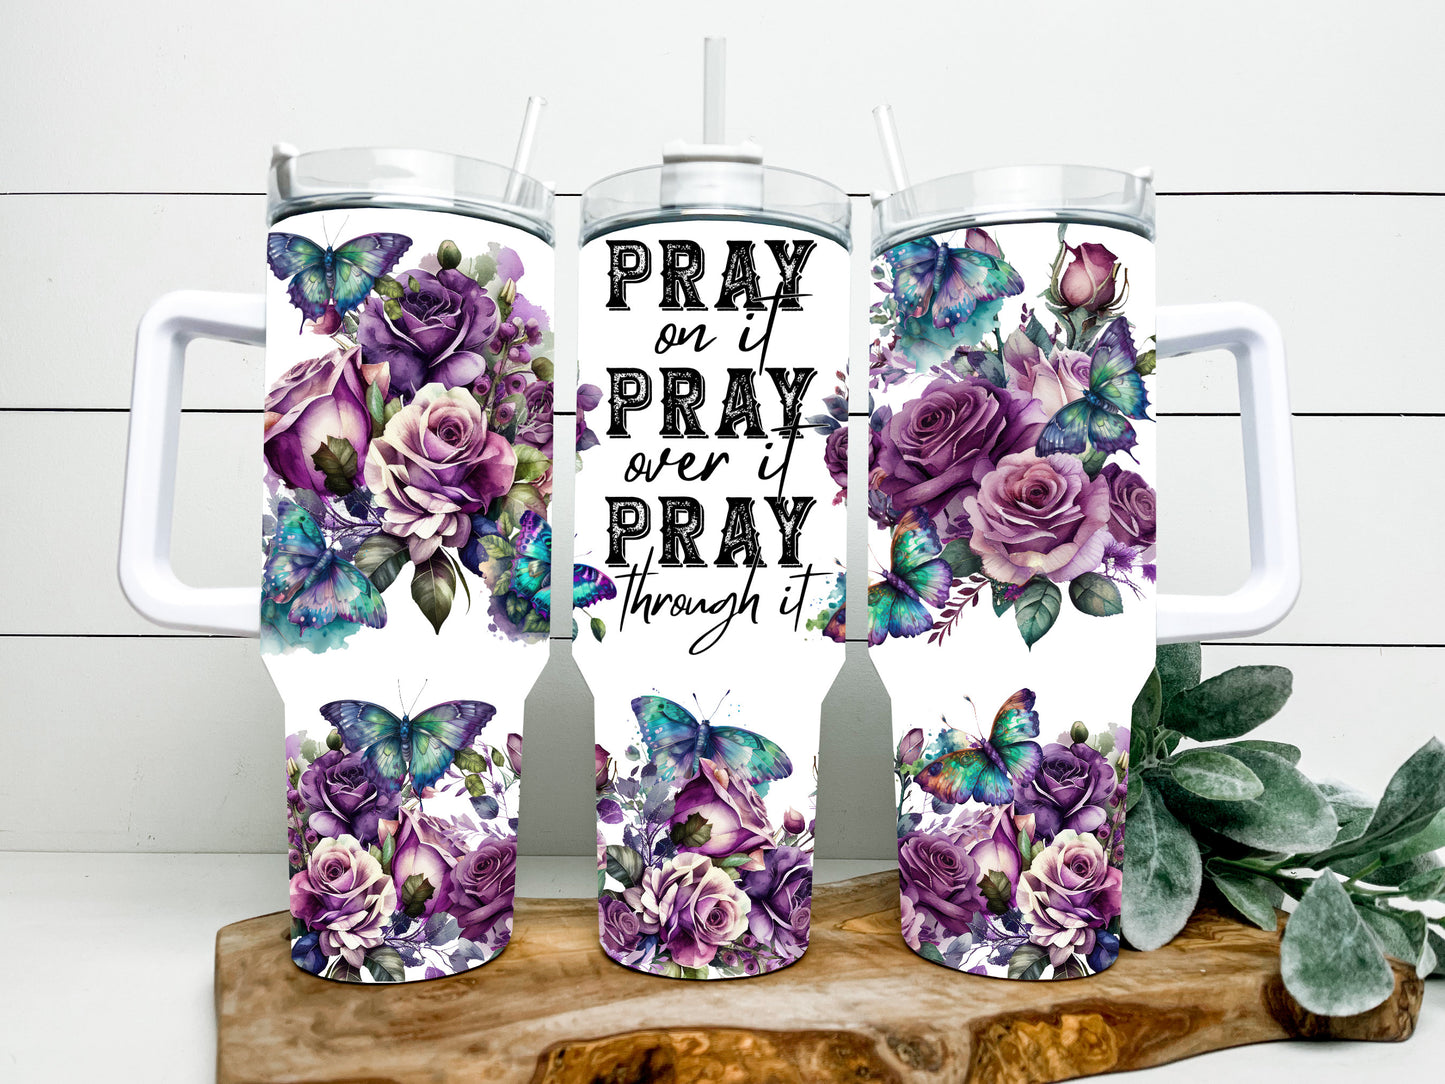 Pray on it pray over it pray through it 40 ounce tumbler with purple roses and butterflies